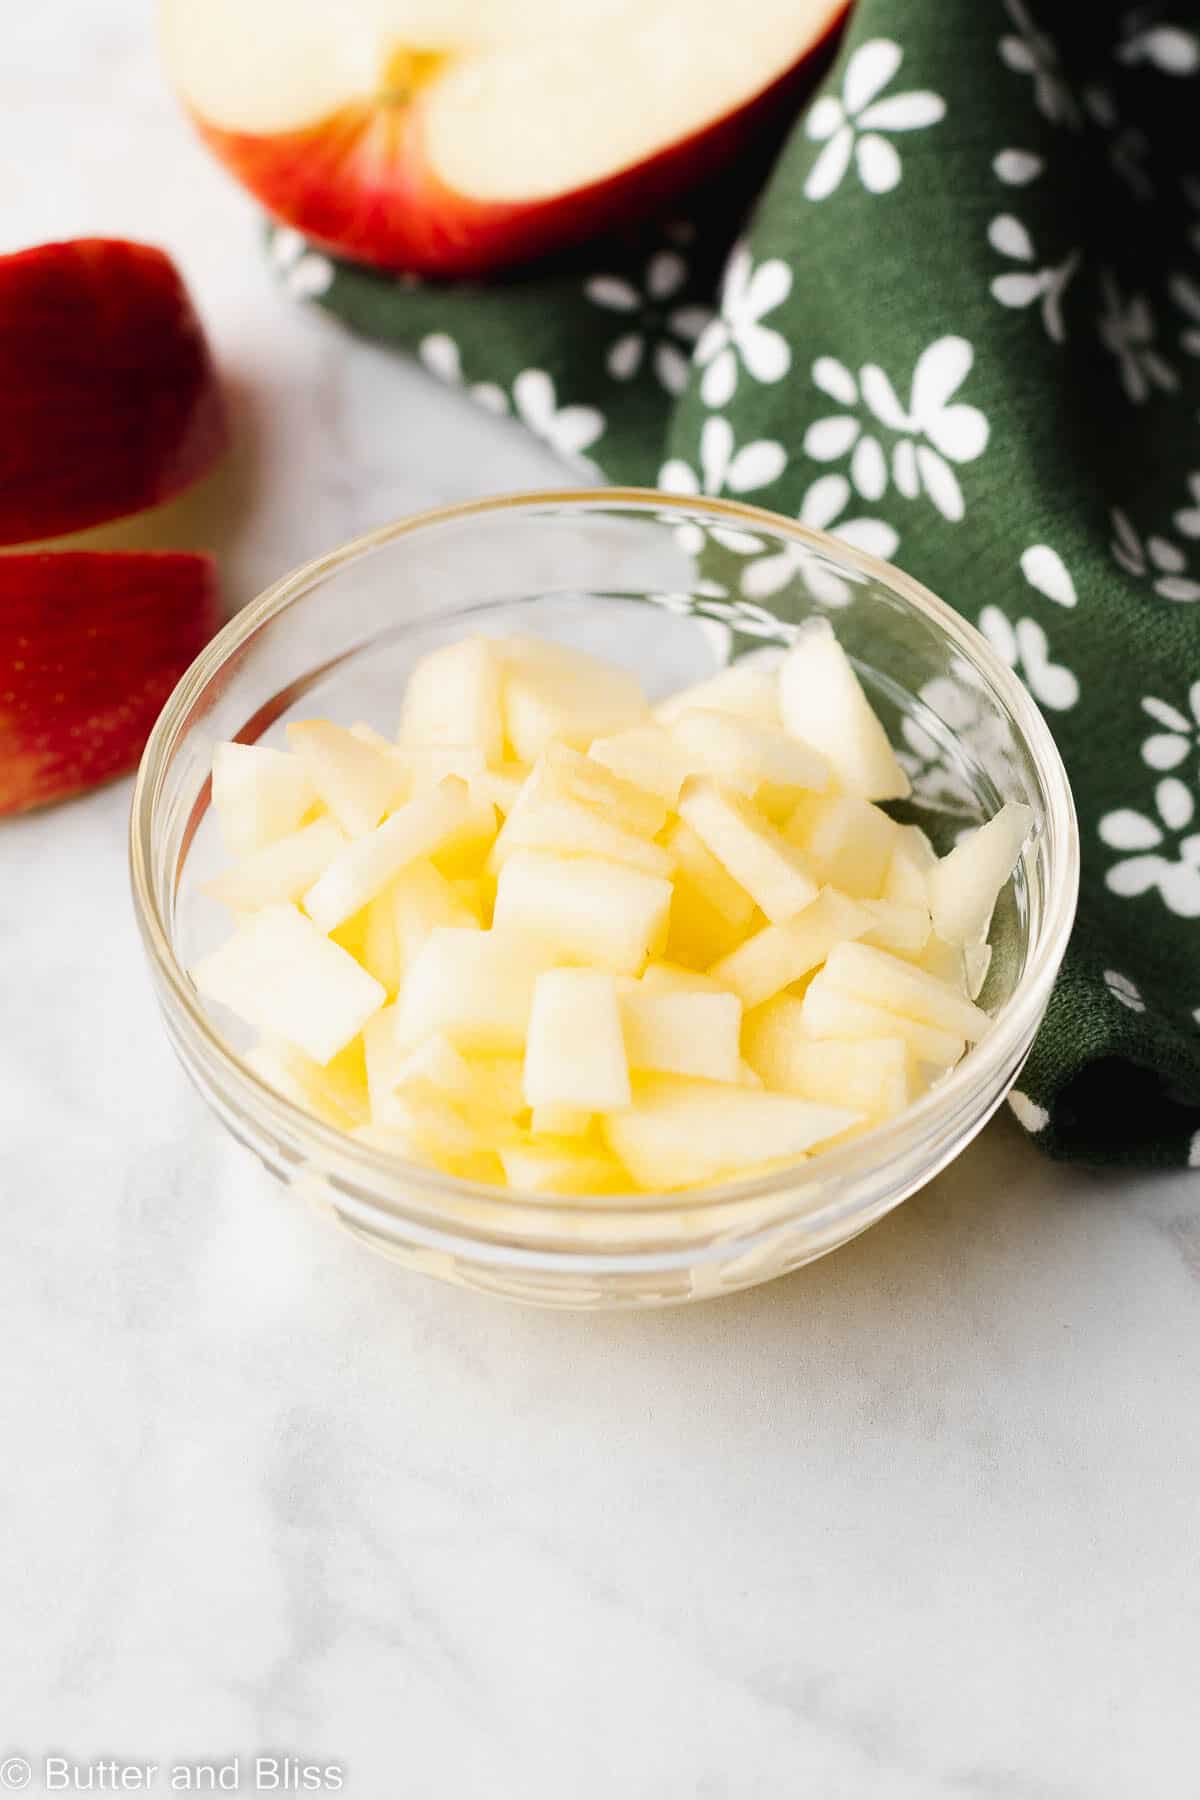 Diced apples in a small glass bowl.